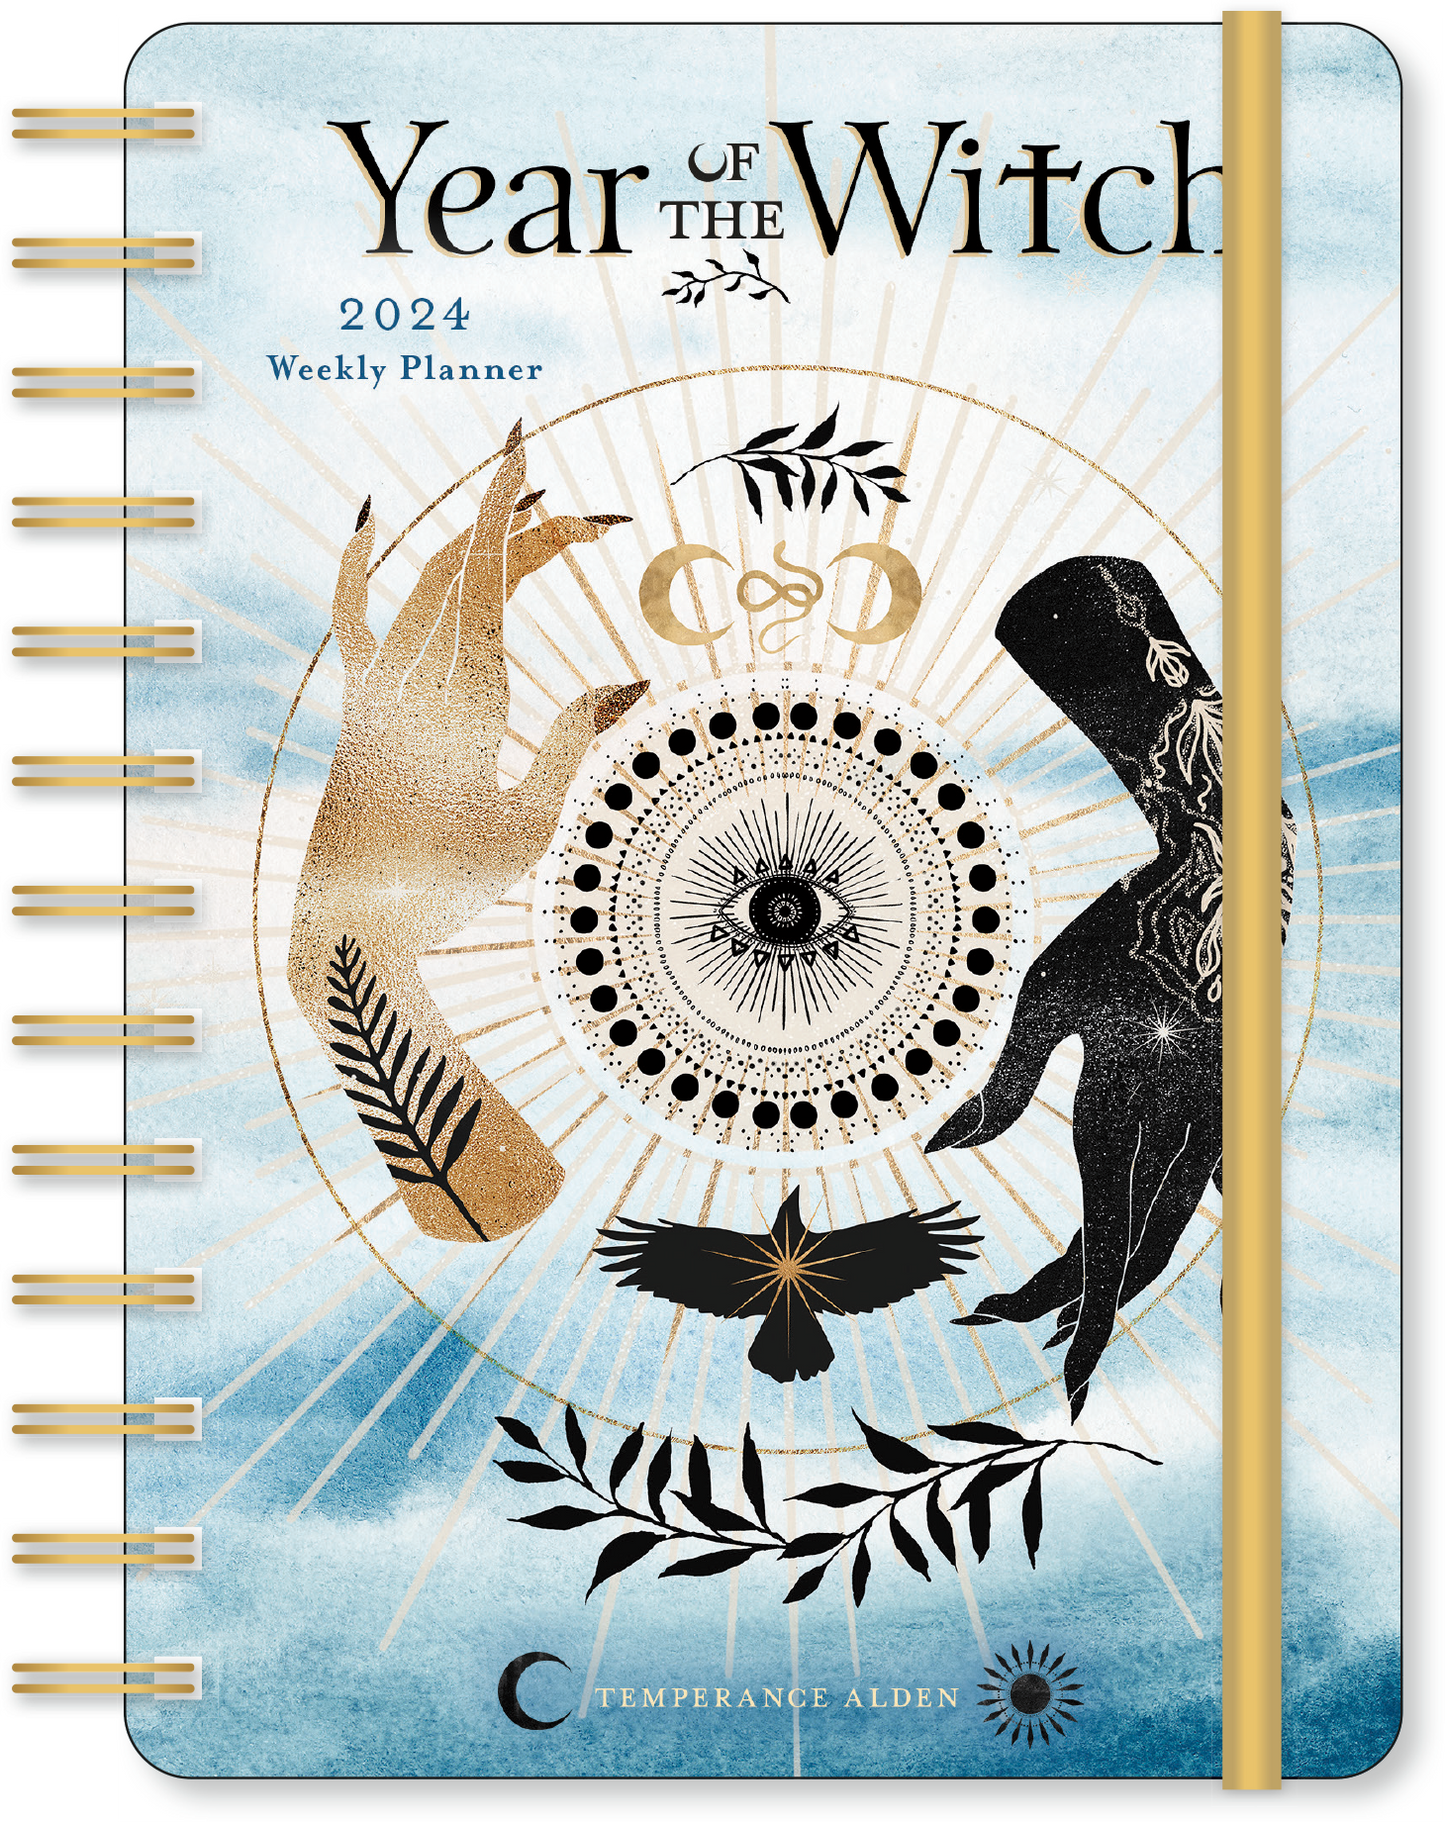 Year of the Witch 2024 Weekly Planner by Temperance Alden